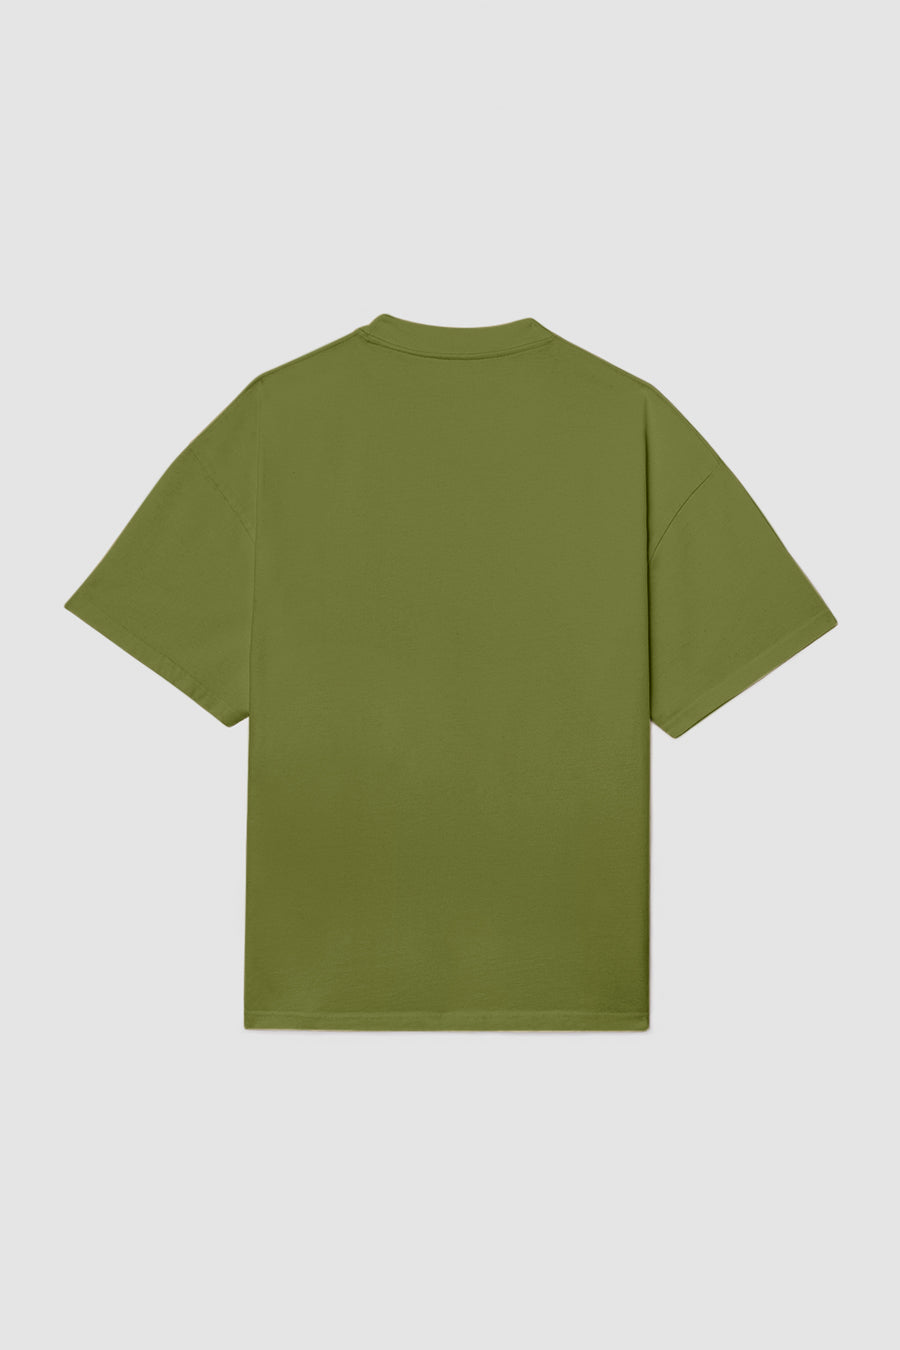 Olive T-Shirt - only available in wholesale